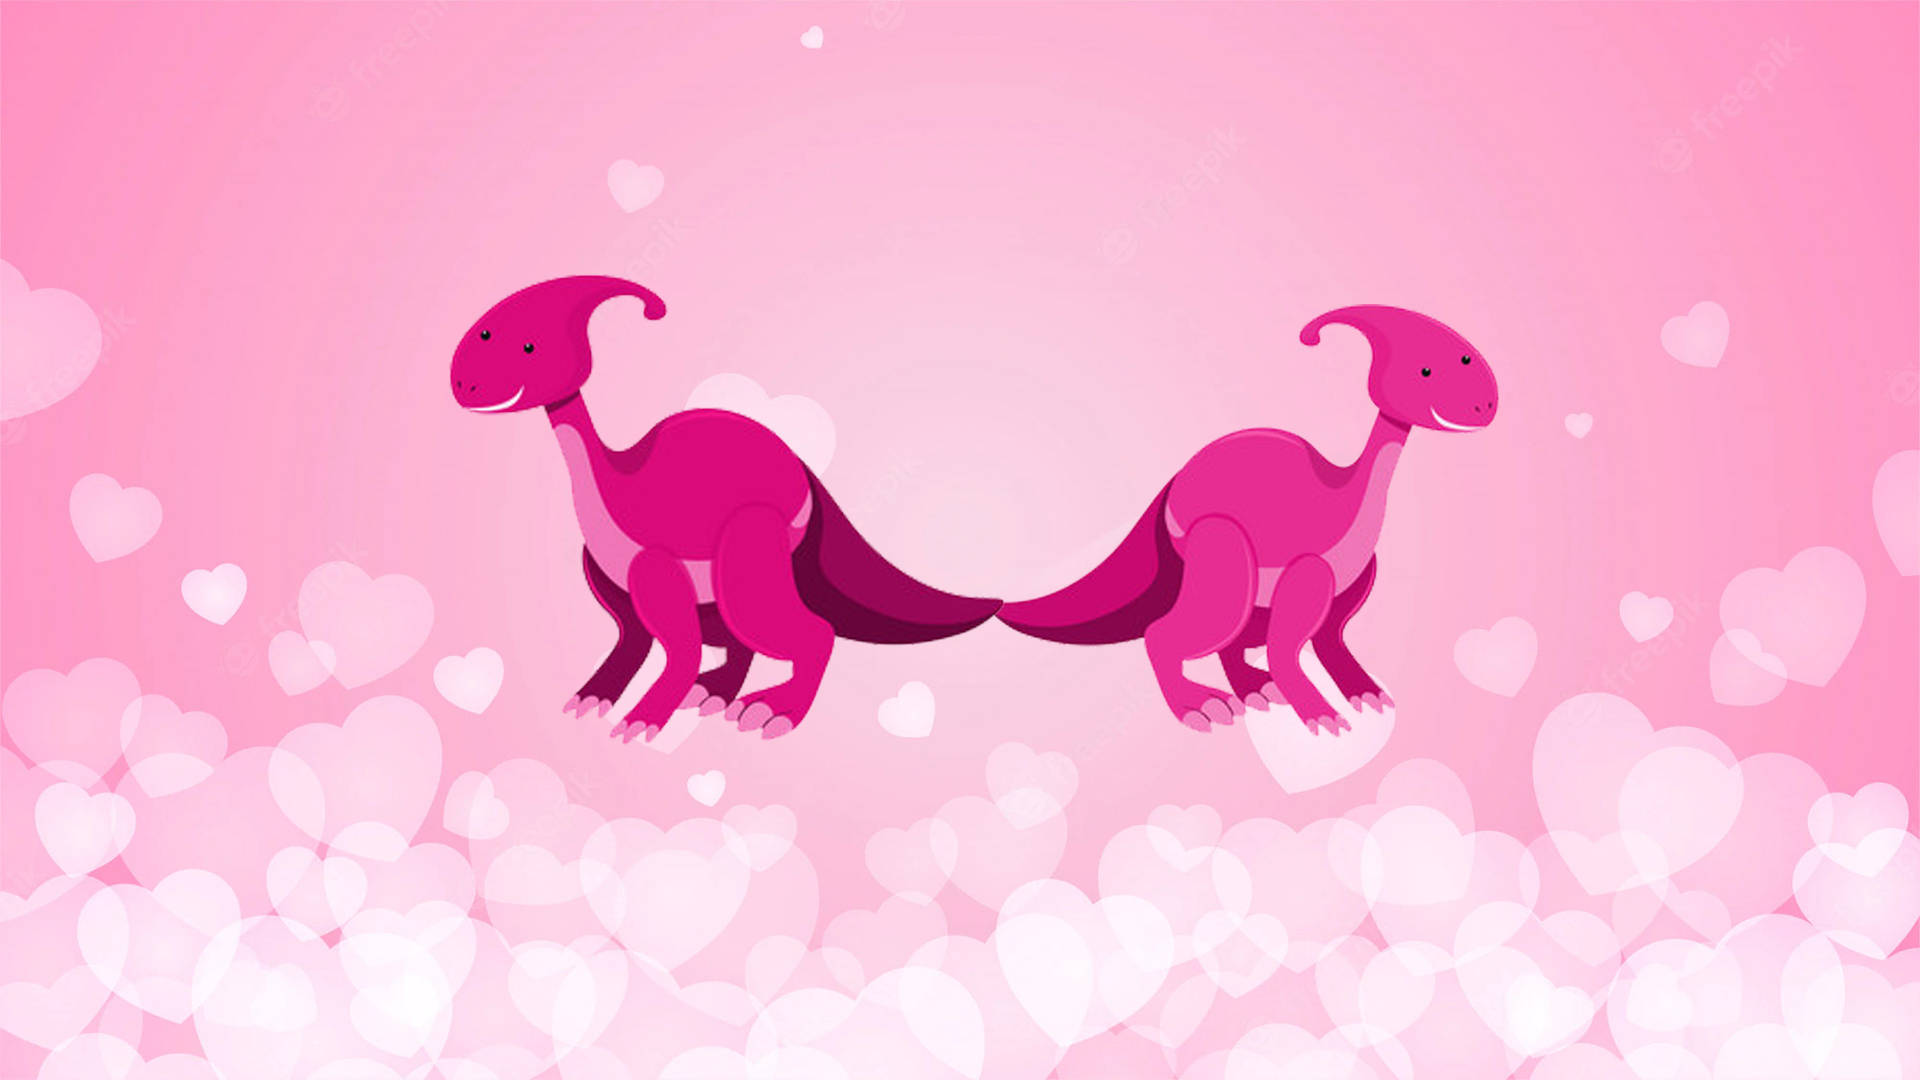 Cute Pink Dinosaur Back-to-back Hearts Background